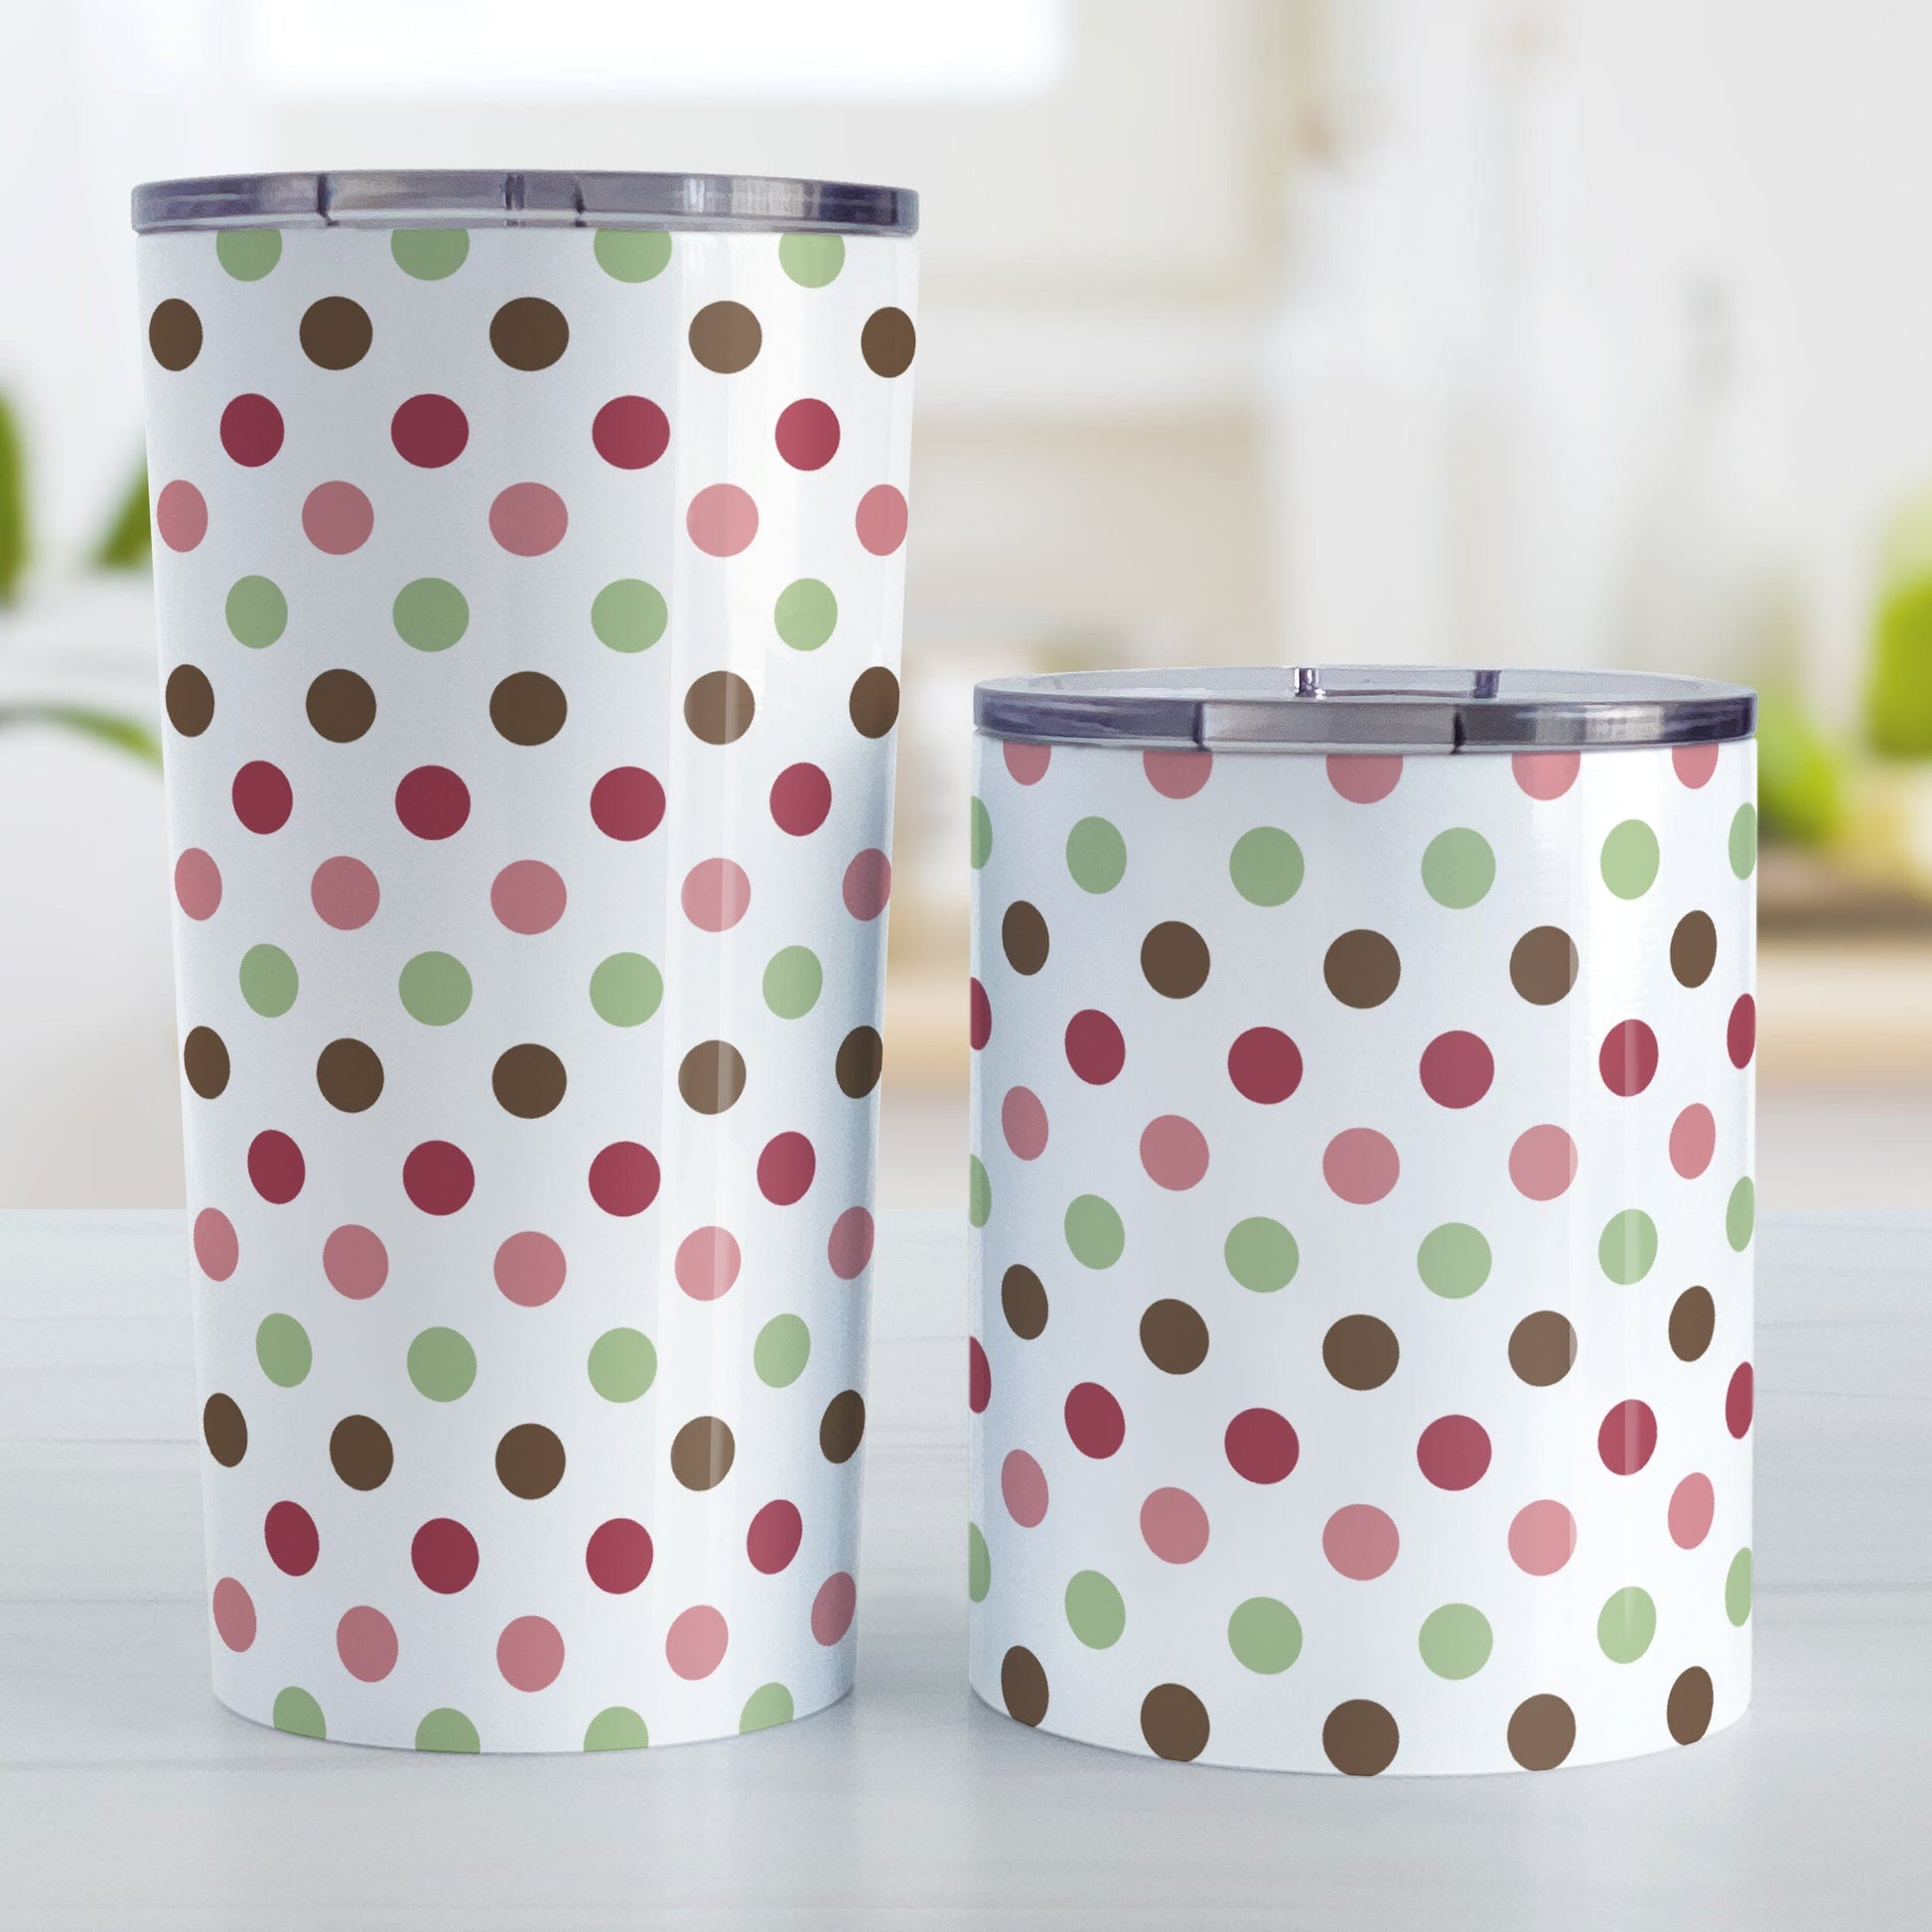 Berry Green Polka Dots Tumbler Cup (20oz or 10oz) at Amy's Coffee Mugs. Stainless steel tumbler cups designed with a pattern of polka dots a color palette of berry pink hues, sage green, and brown that wraps around the cups. Photo shows both sized cups next to each other on a table.